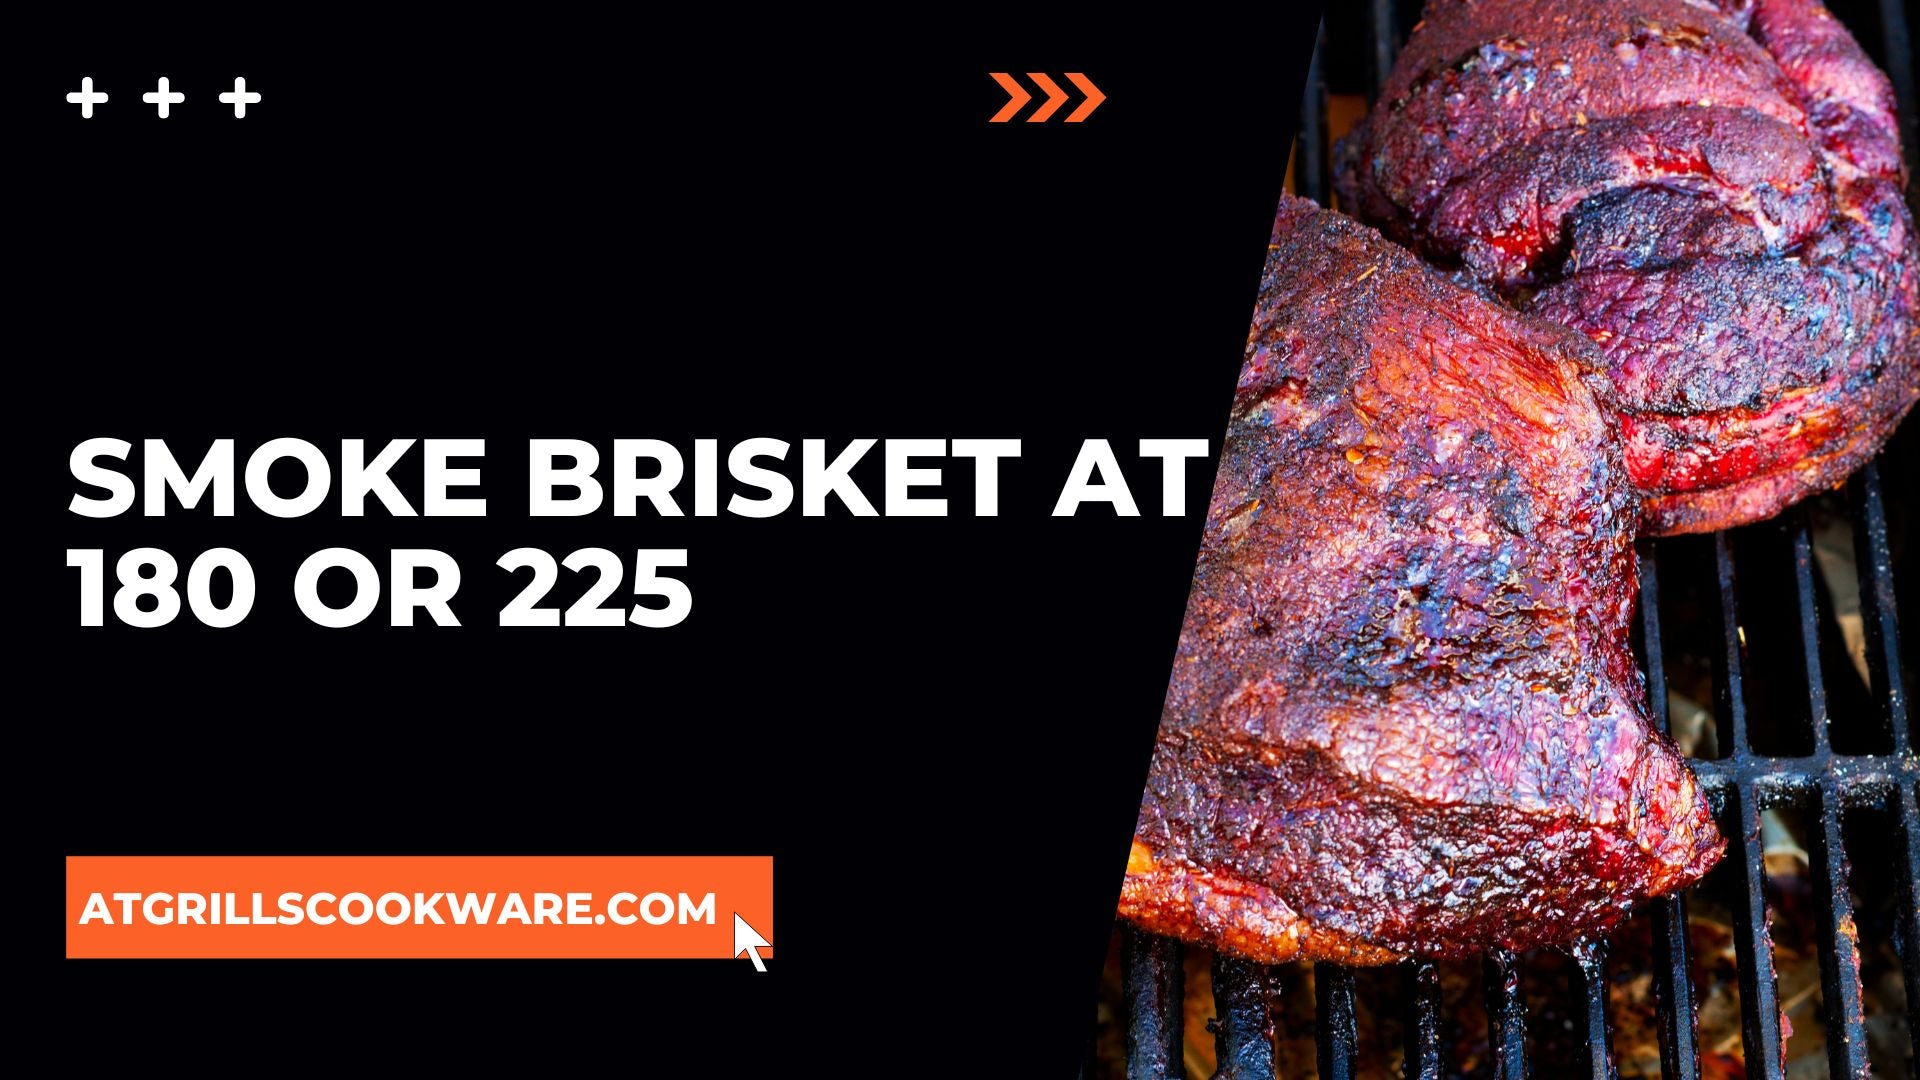 Smoke Brisket at 180 or 225: Finding the Perfect Temperature for Tender, Flavorful Results